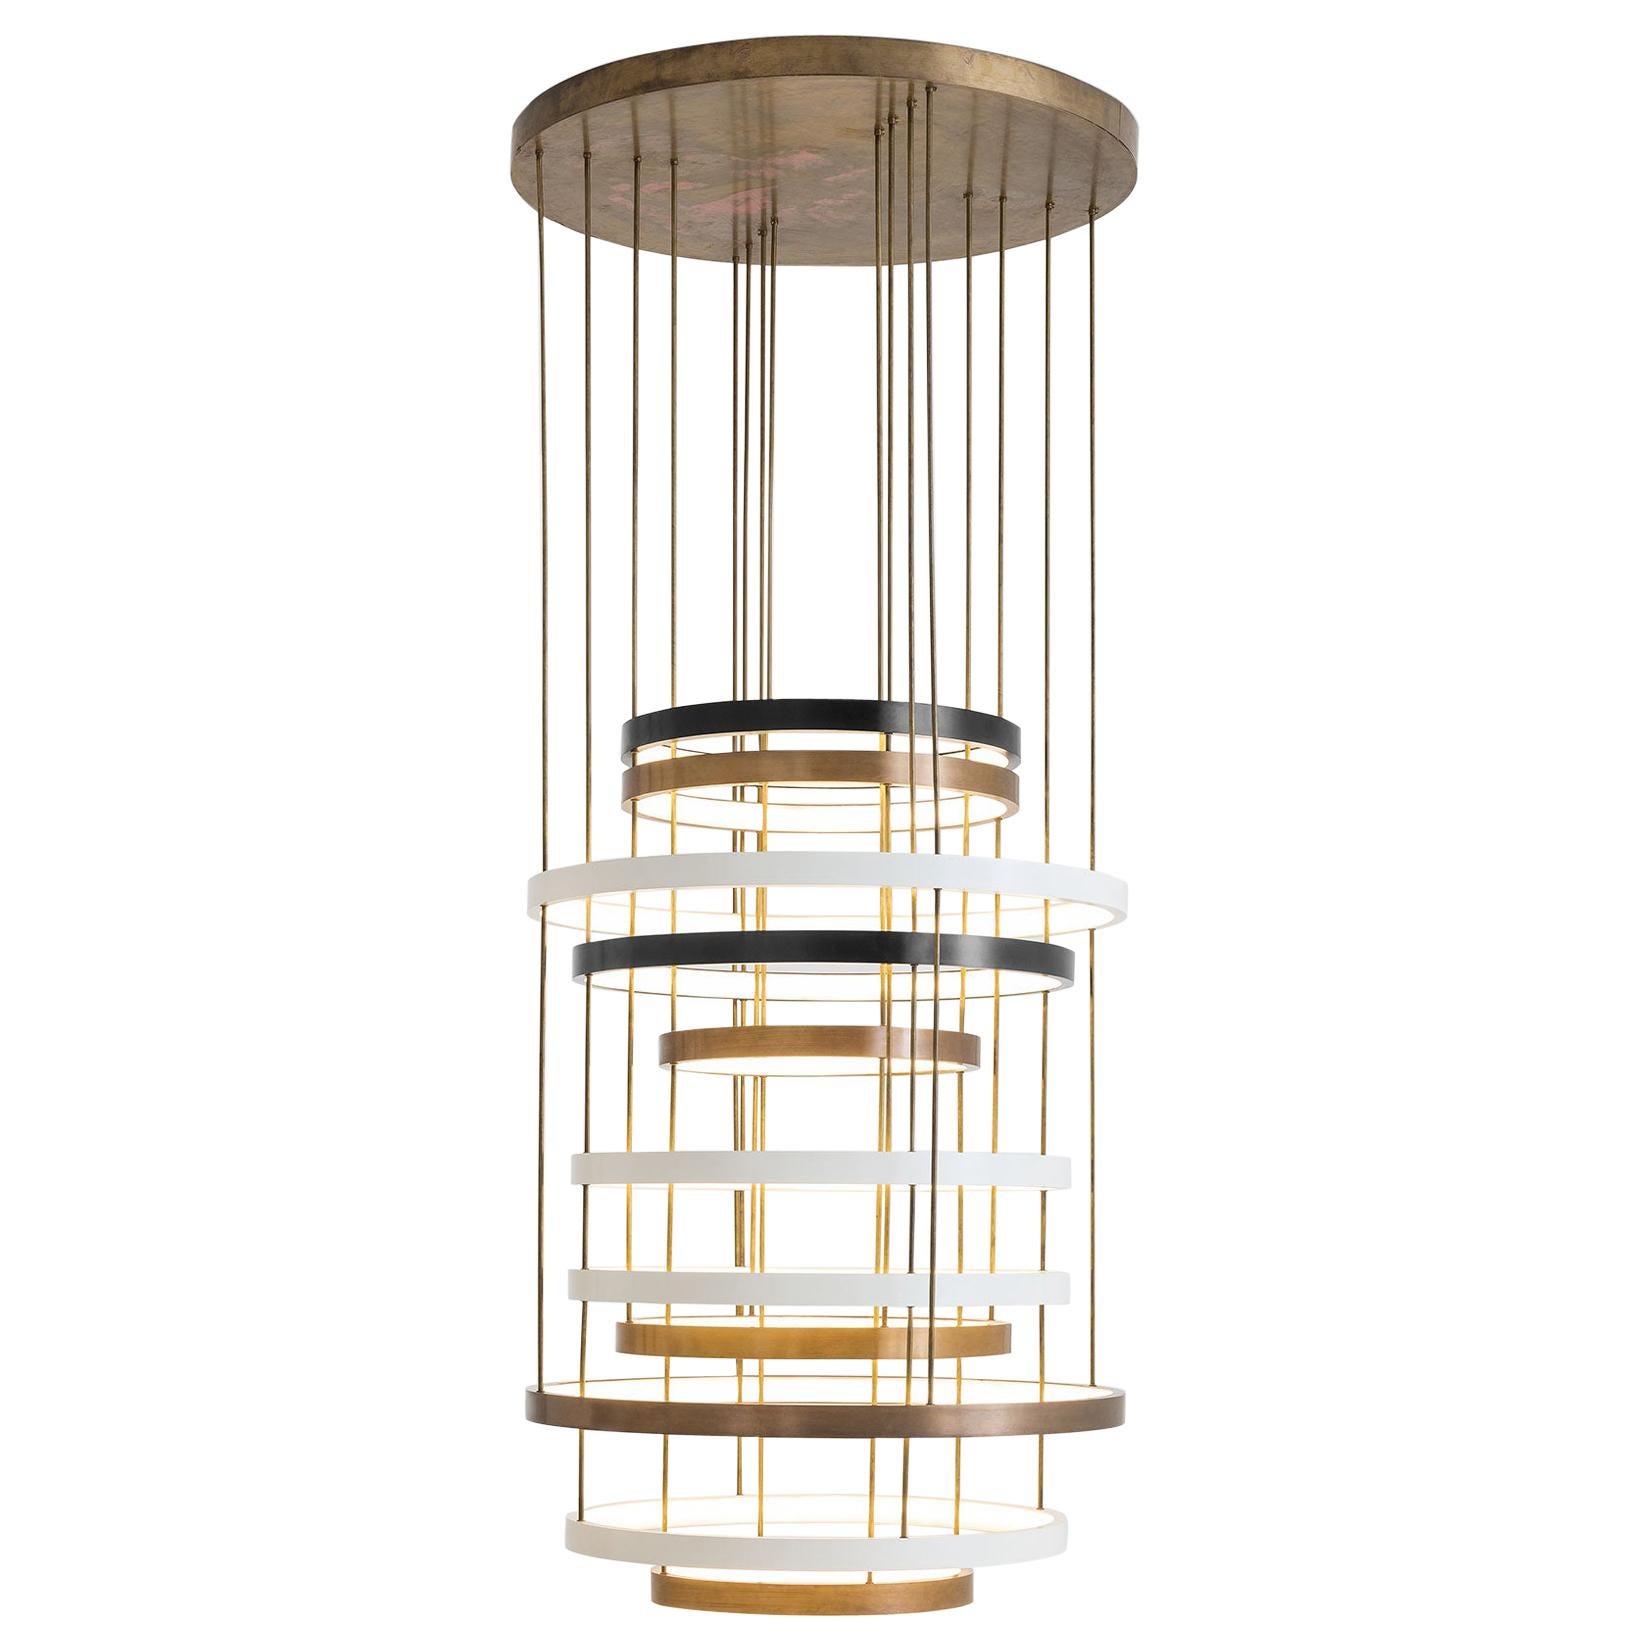 Lumiere 11 Rings Ceiling Lamp in Oxidised Brass and Opal Perspex by Dimoremilano For Sale